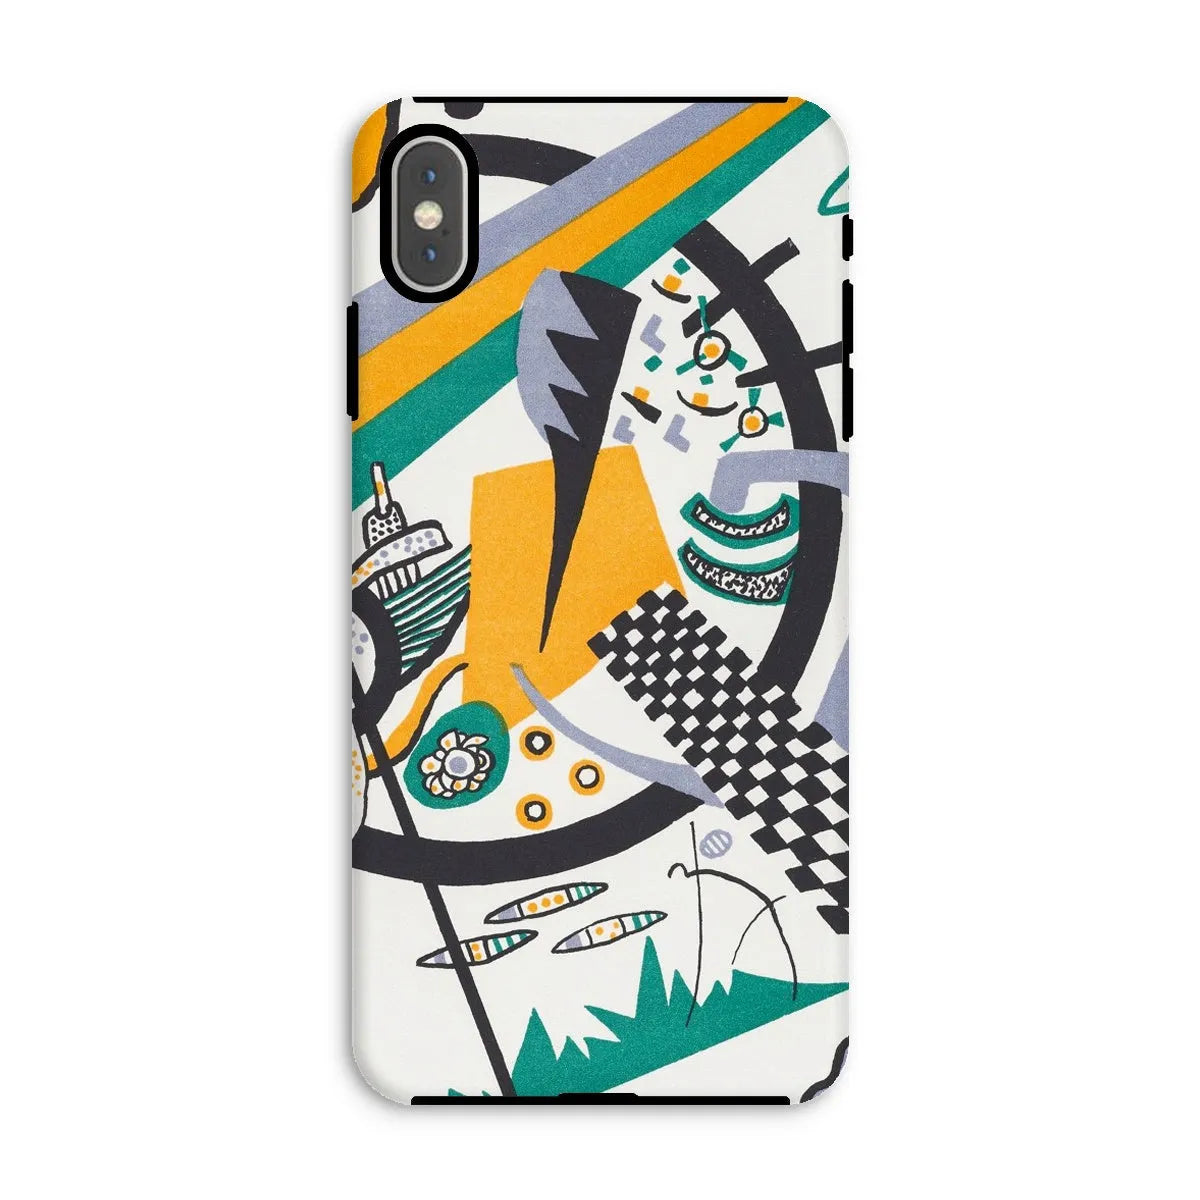 Small Worlds Iv - Expressionist Phone Case - Wassily Kandinsky - Iphone Xs Max / Matte - Mobile Phone Cases - Aesthetic